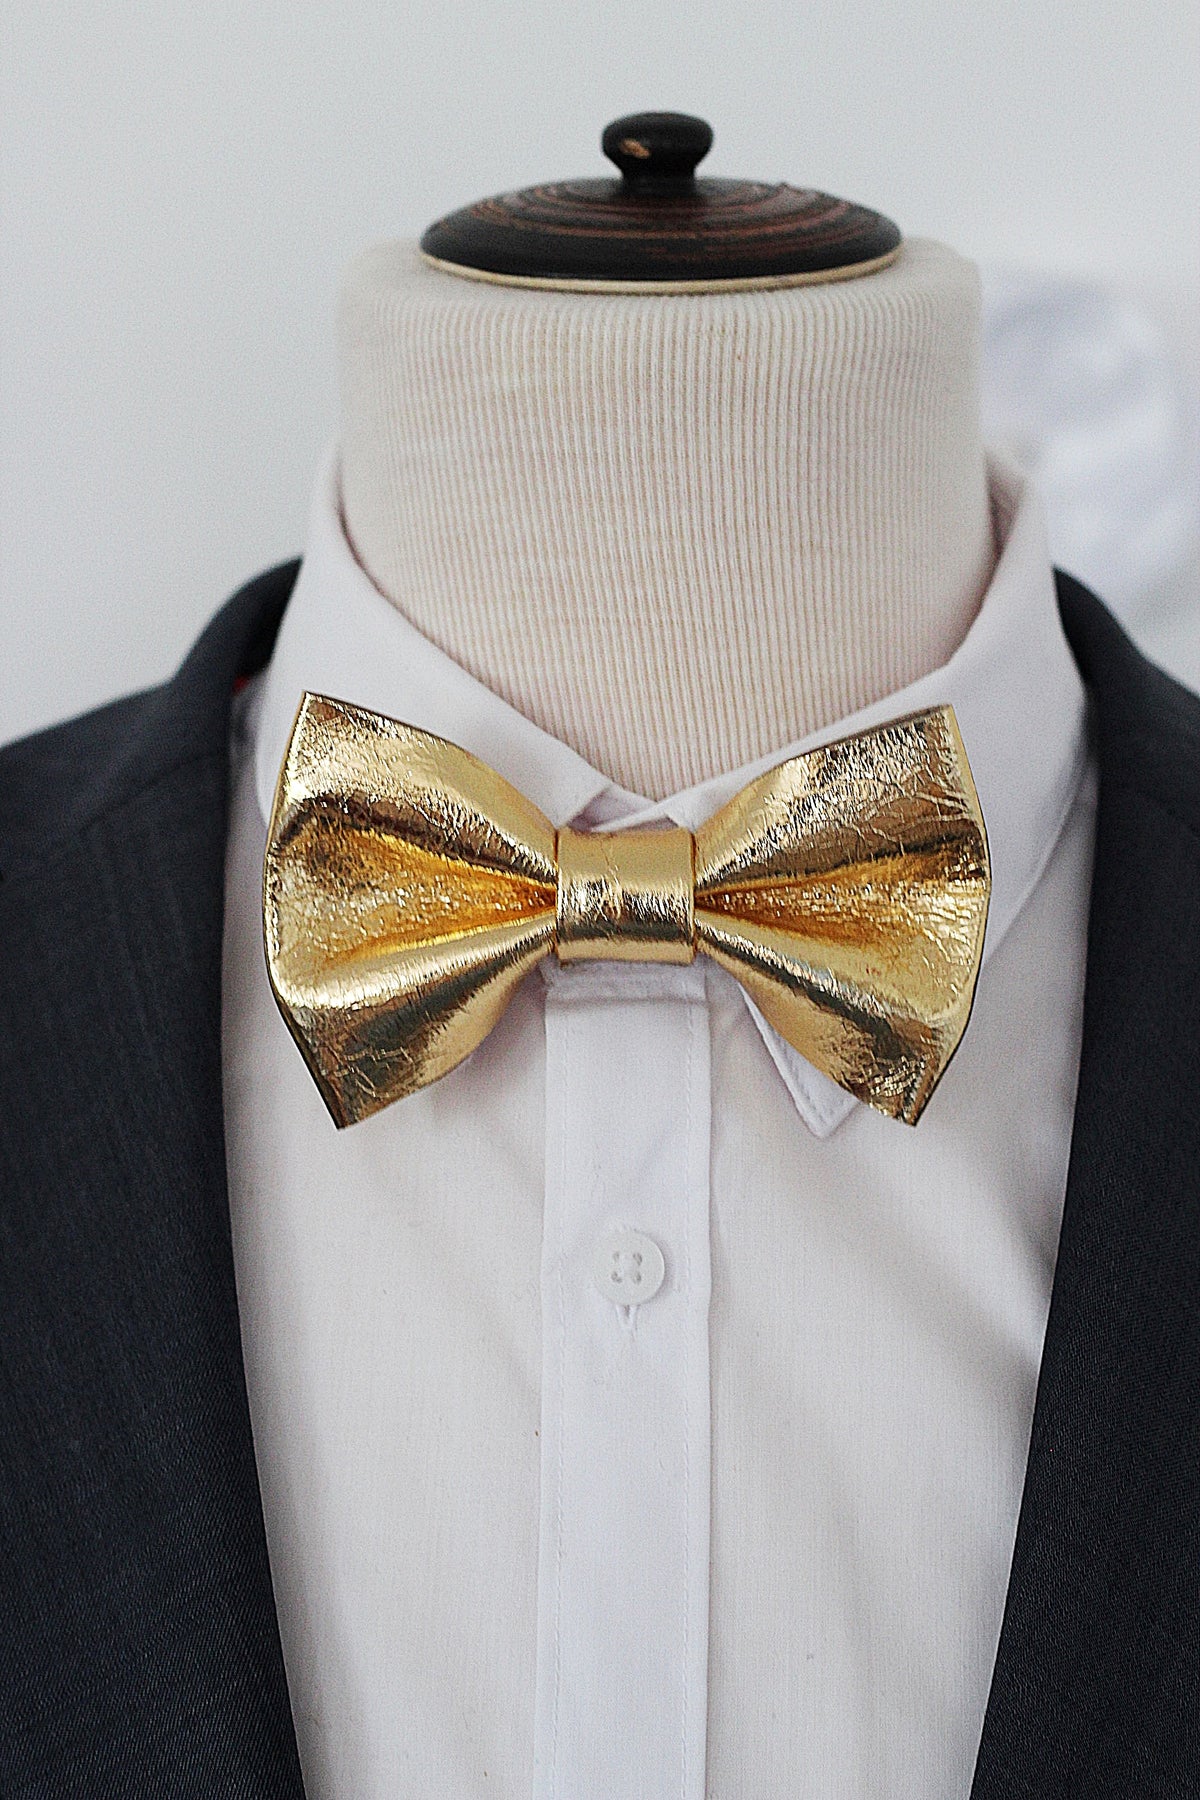 Gold Satin Bow tie, Gold Bow Tie, Gold Christmas Bow tie, Bow ties for Men,  Bow ties for Boys, Gold Bowties, Gold Wedding Bow tie